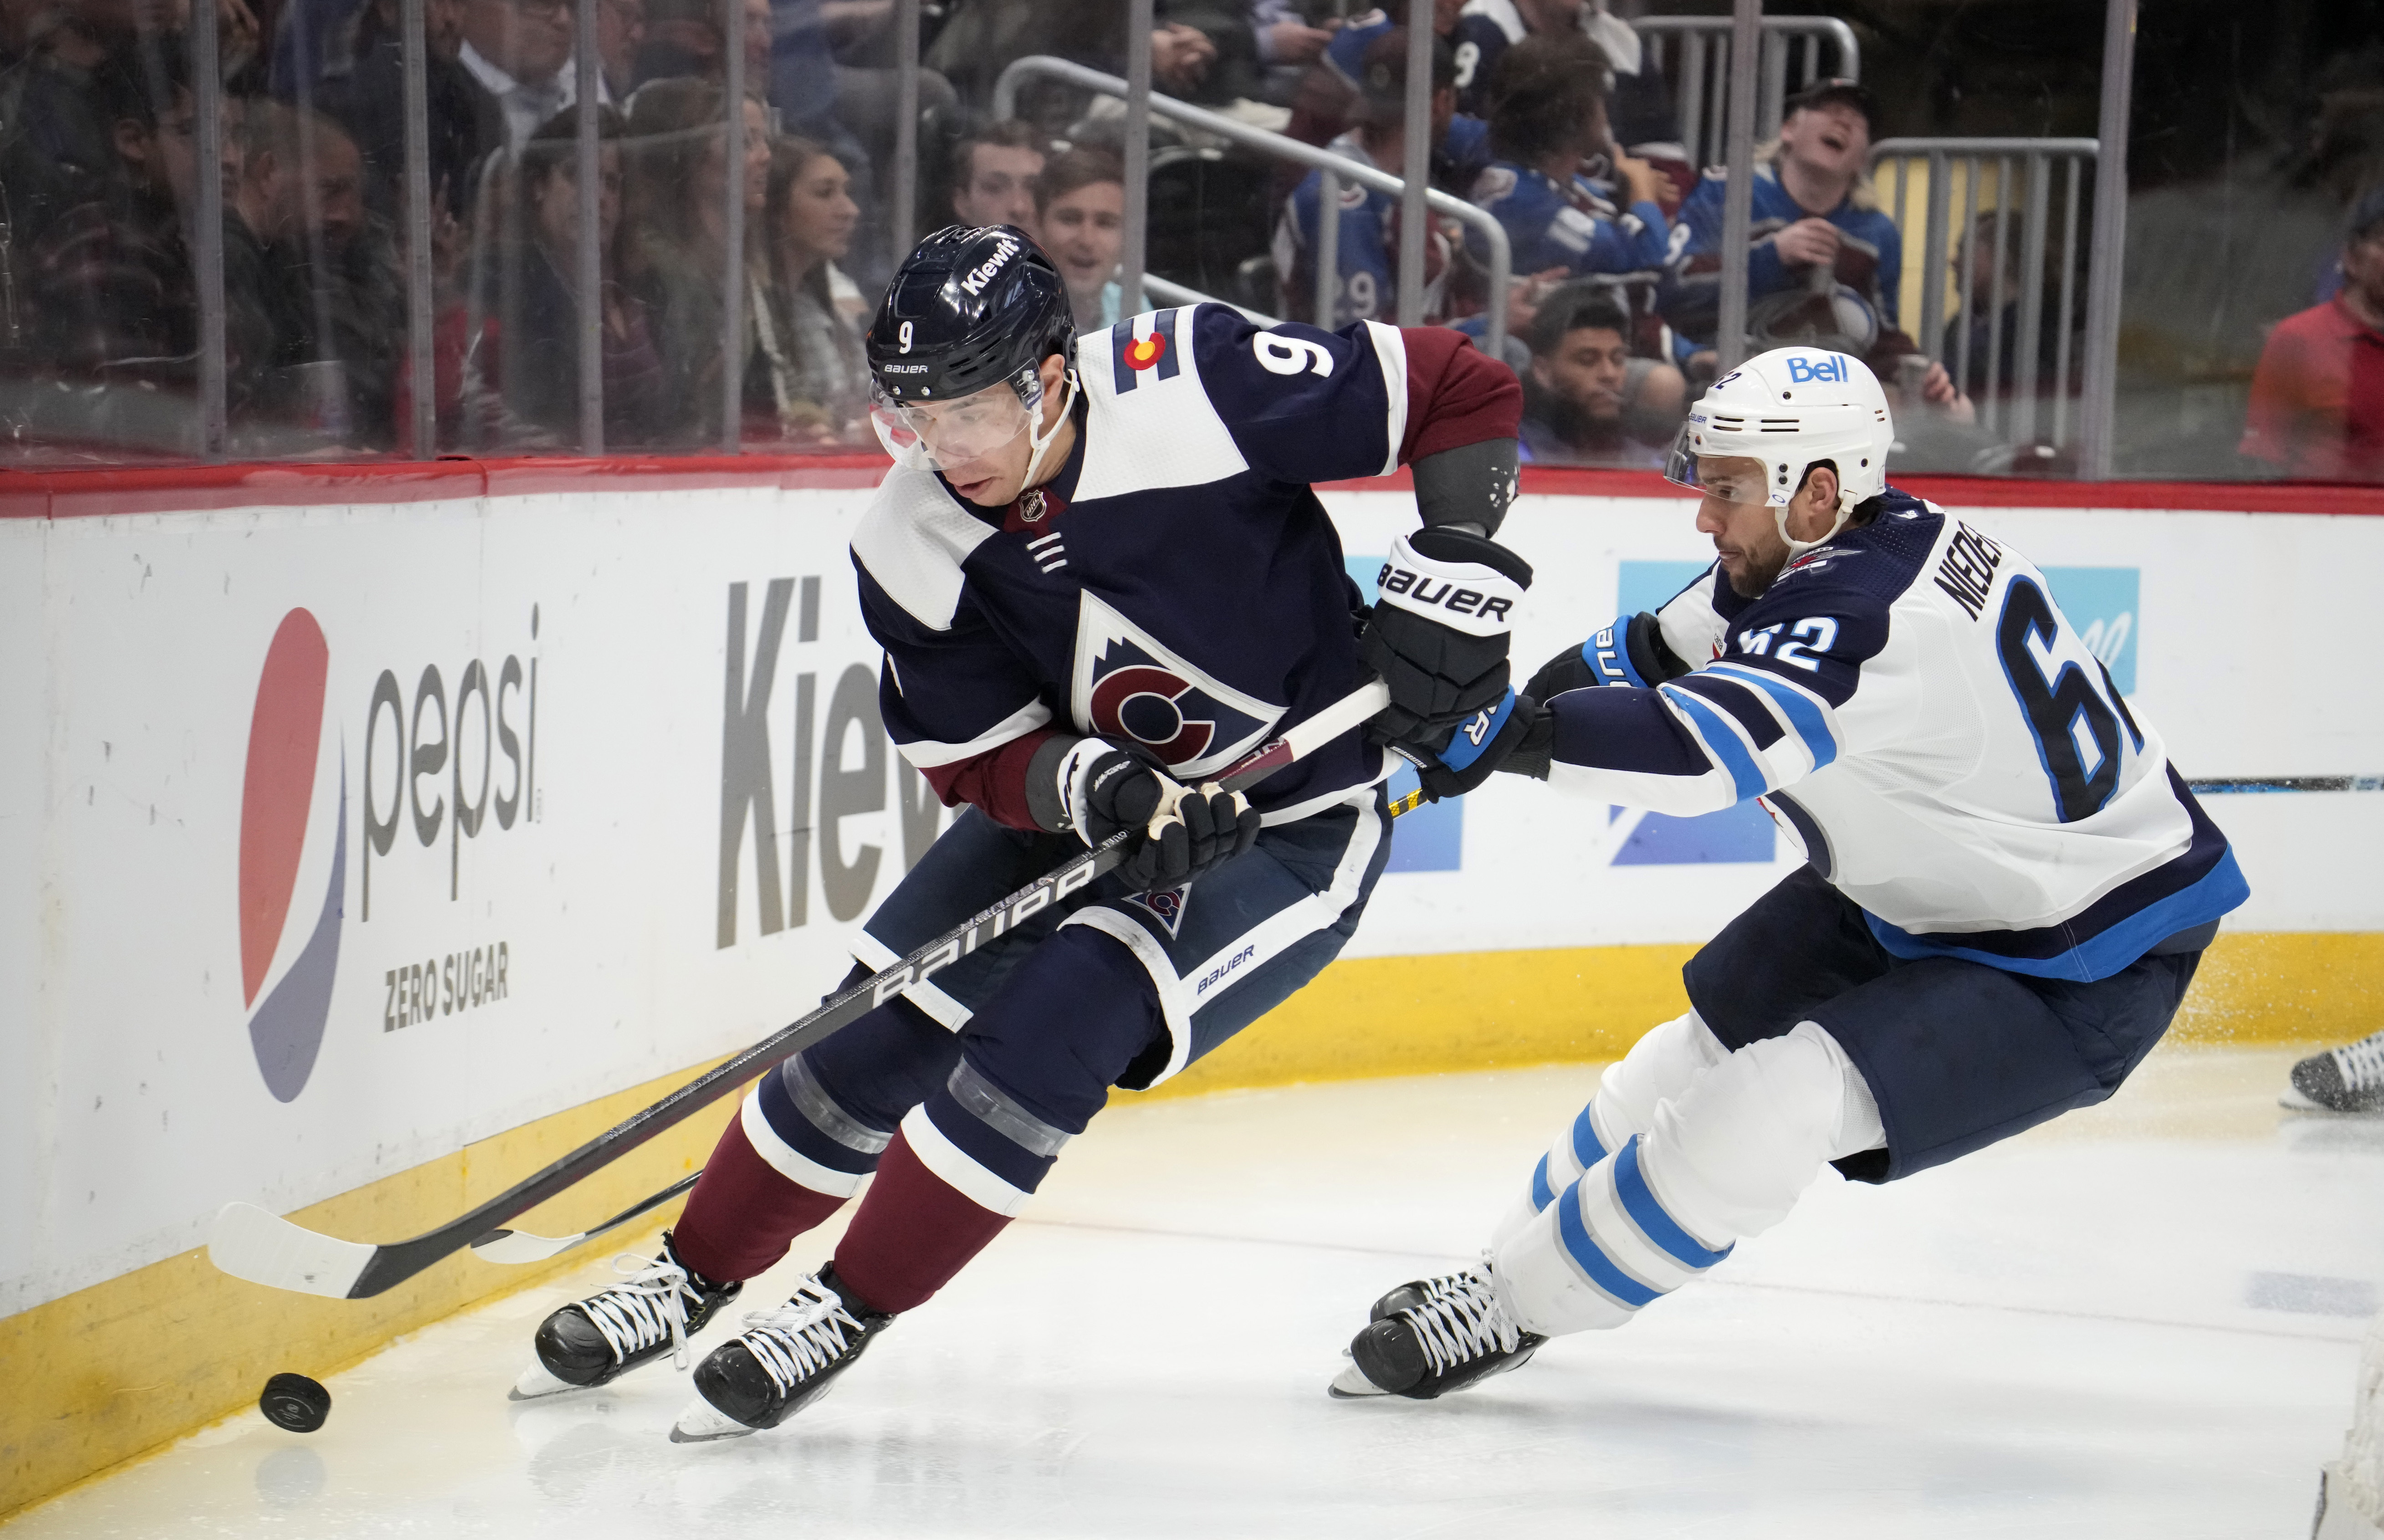 Avs beat Jets 4-2, remain in control of Central Division